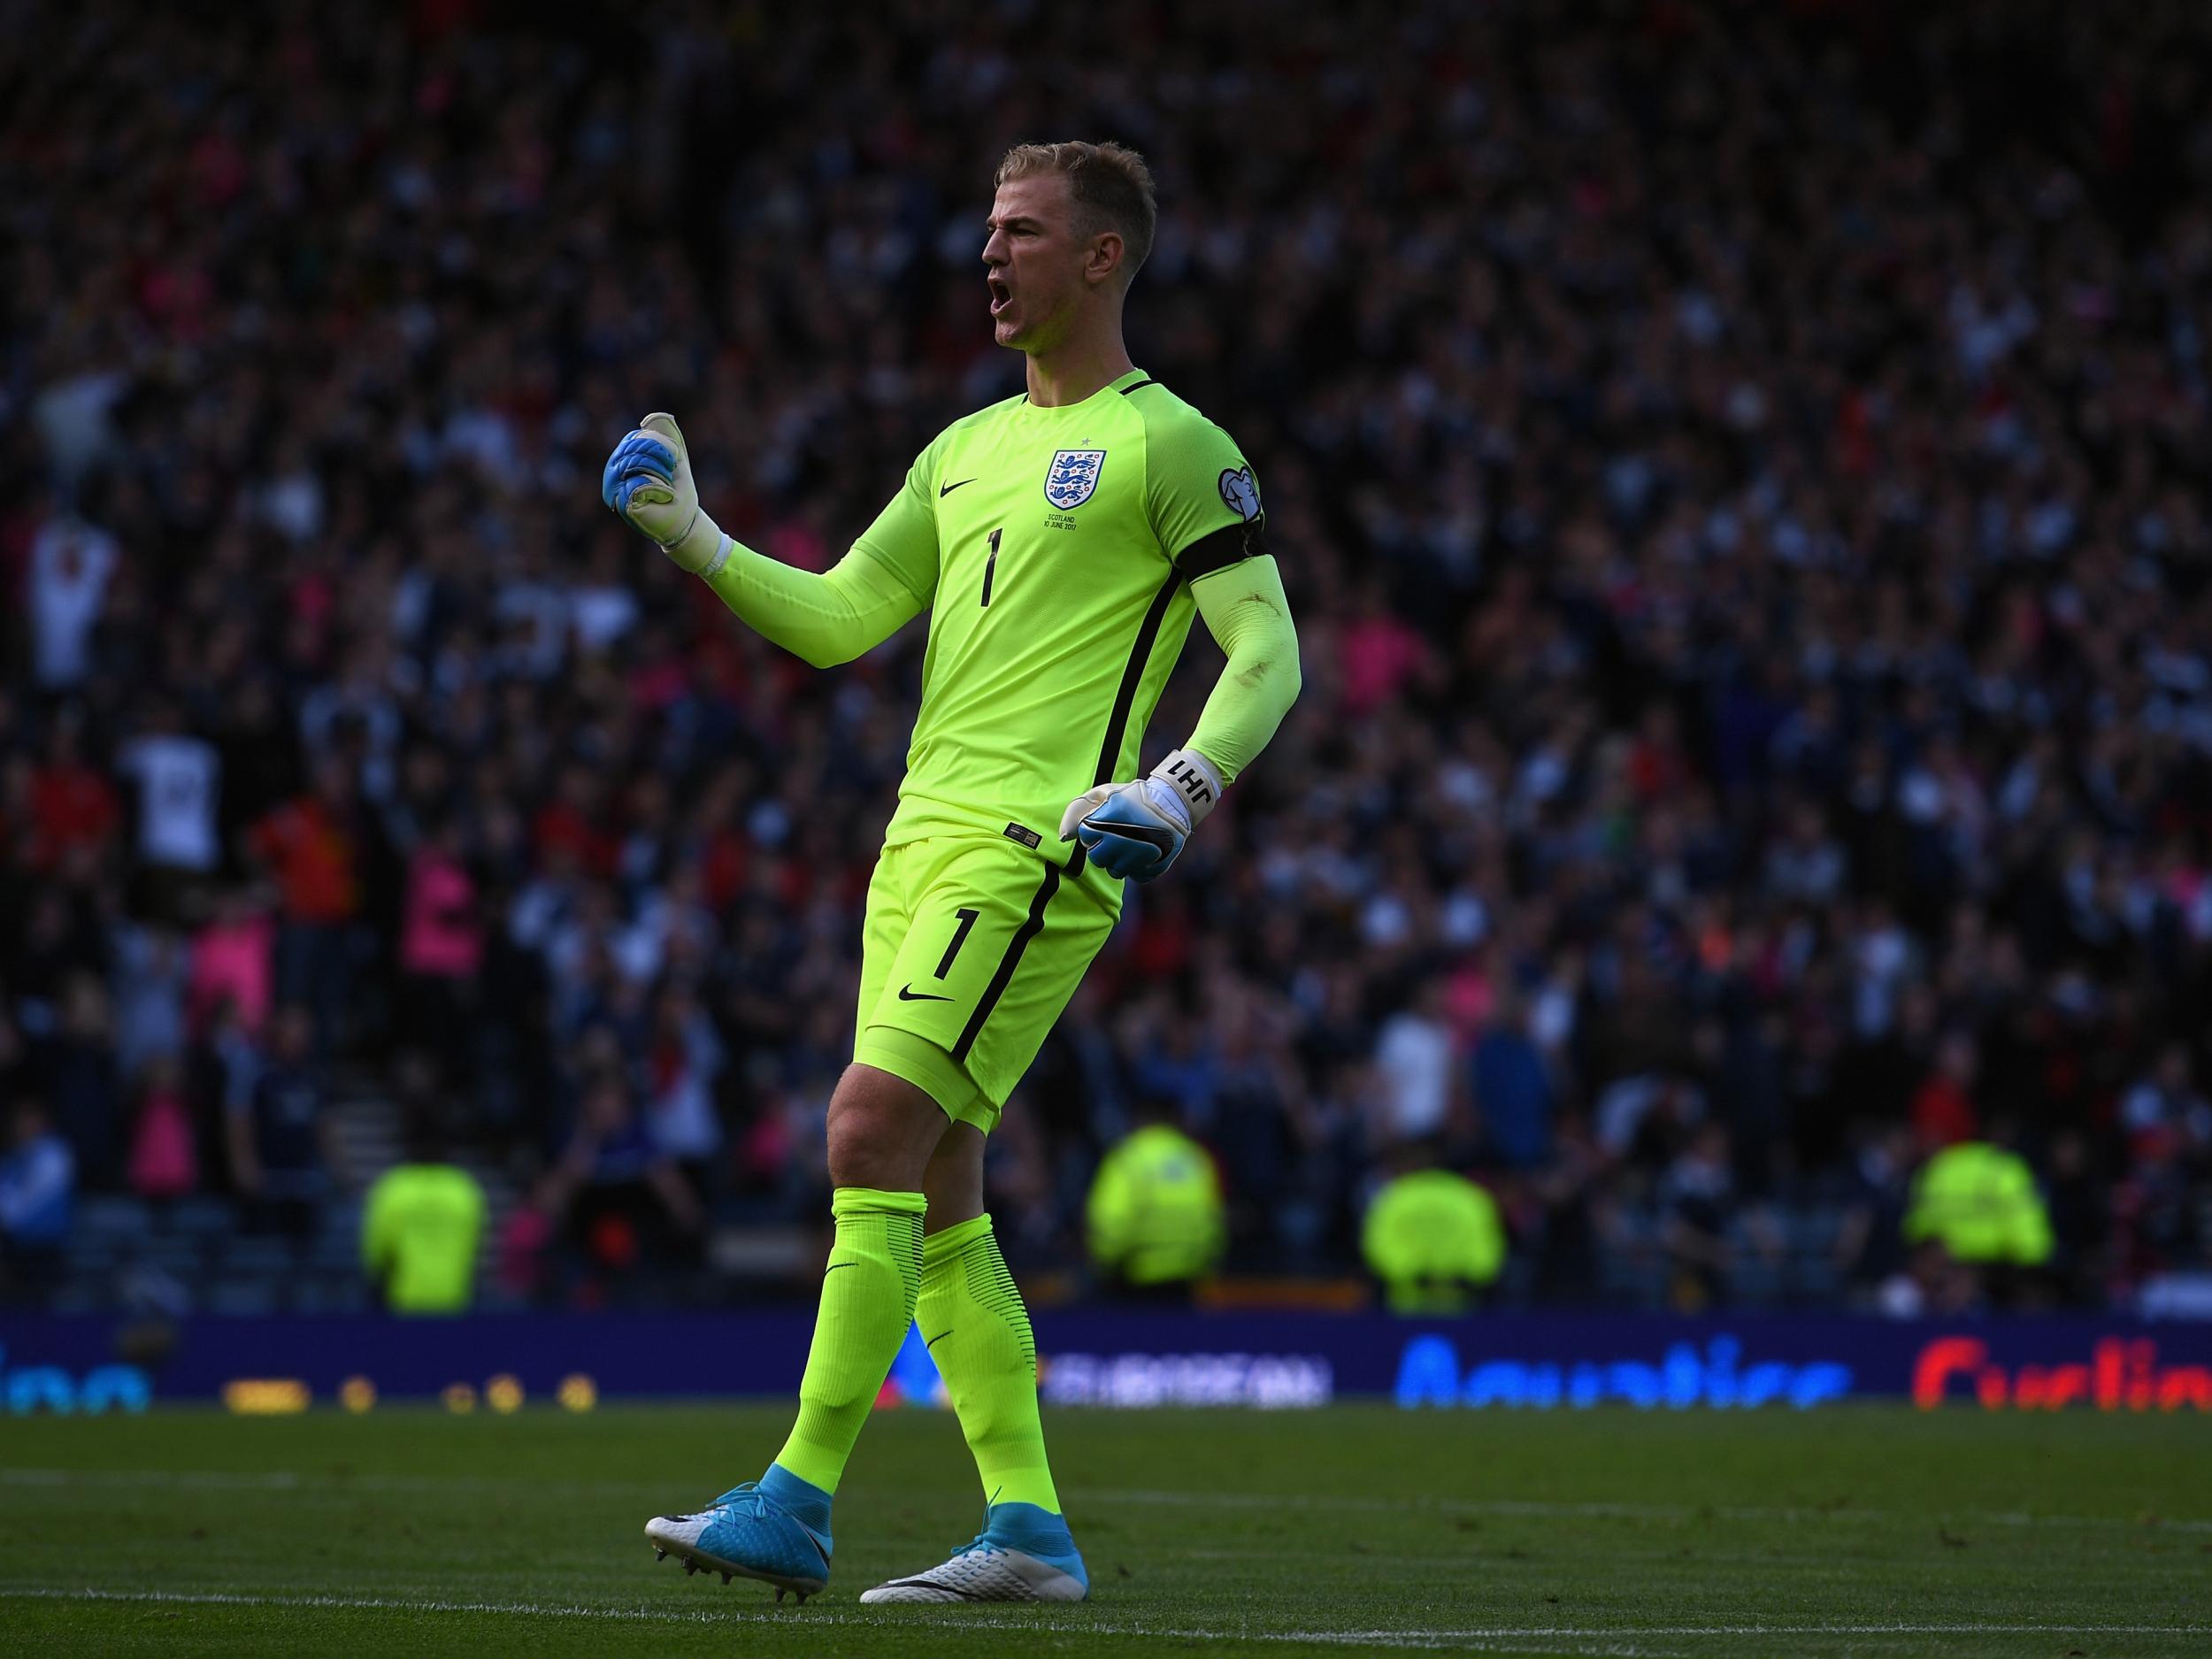 Hart has been working on his composure since leaving Manchester City